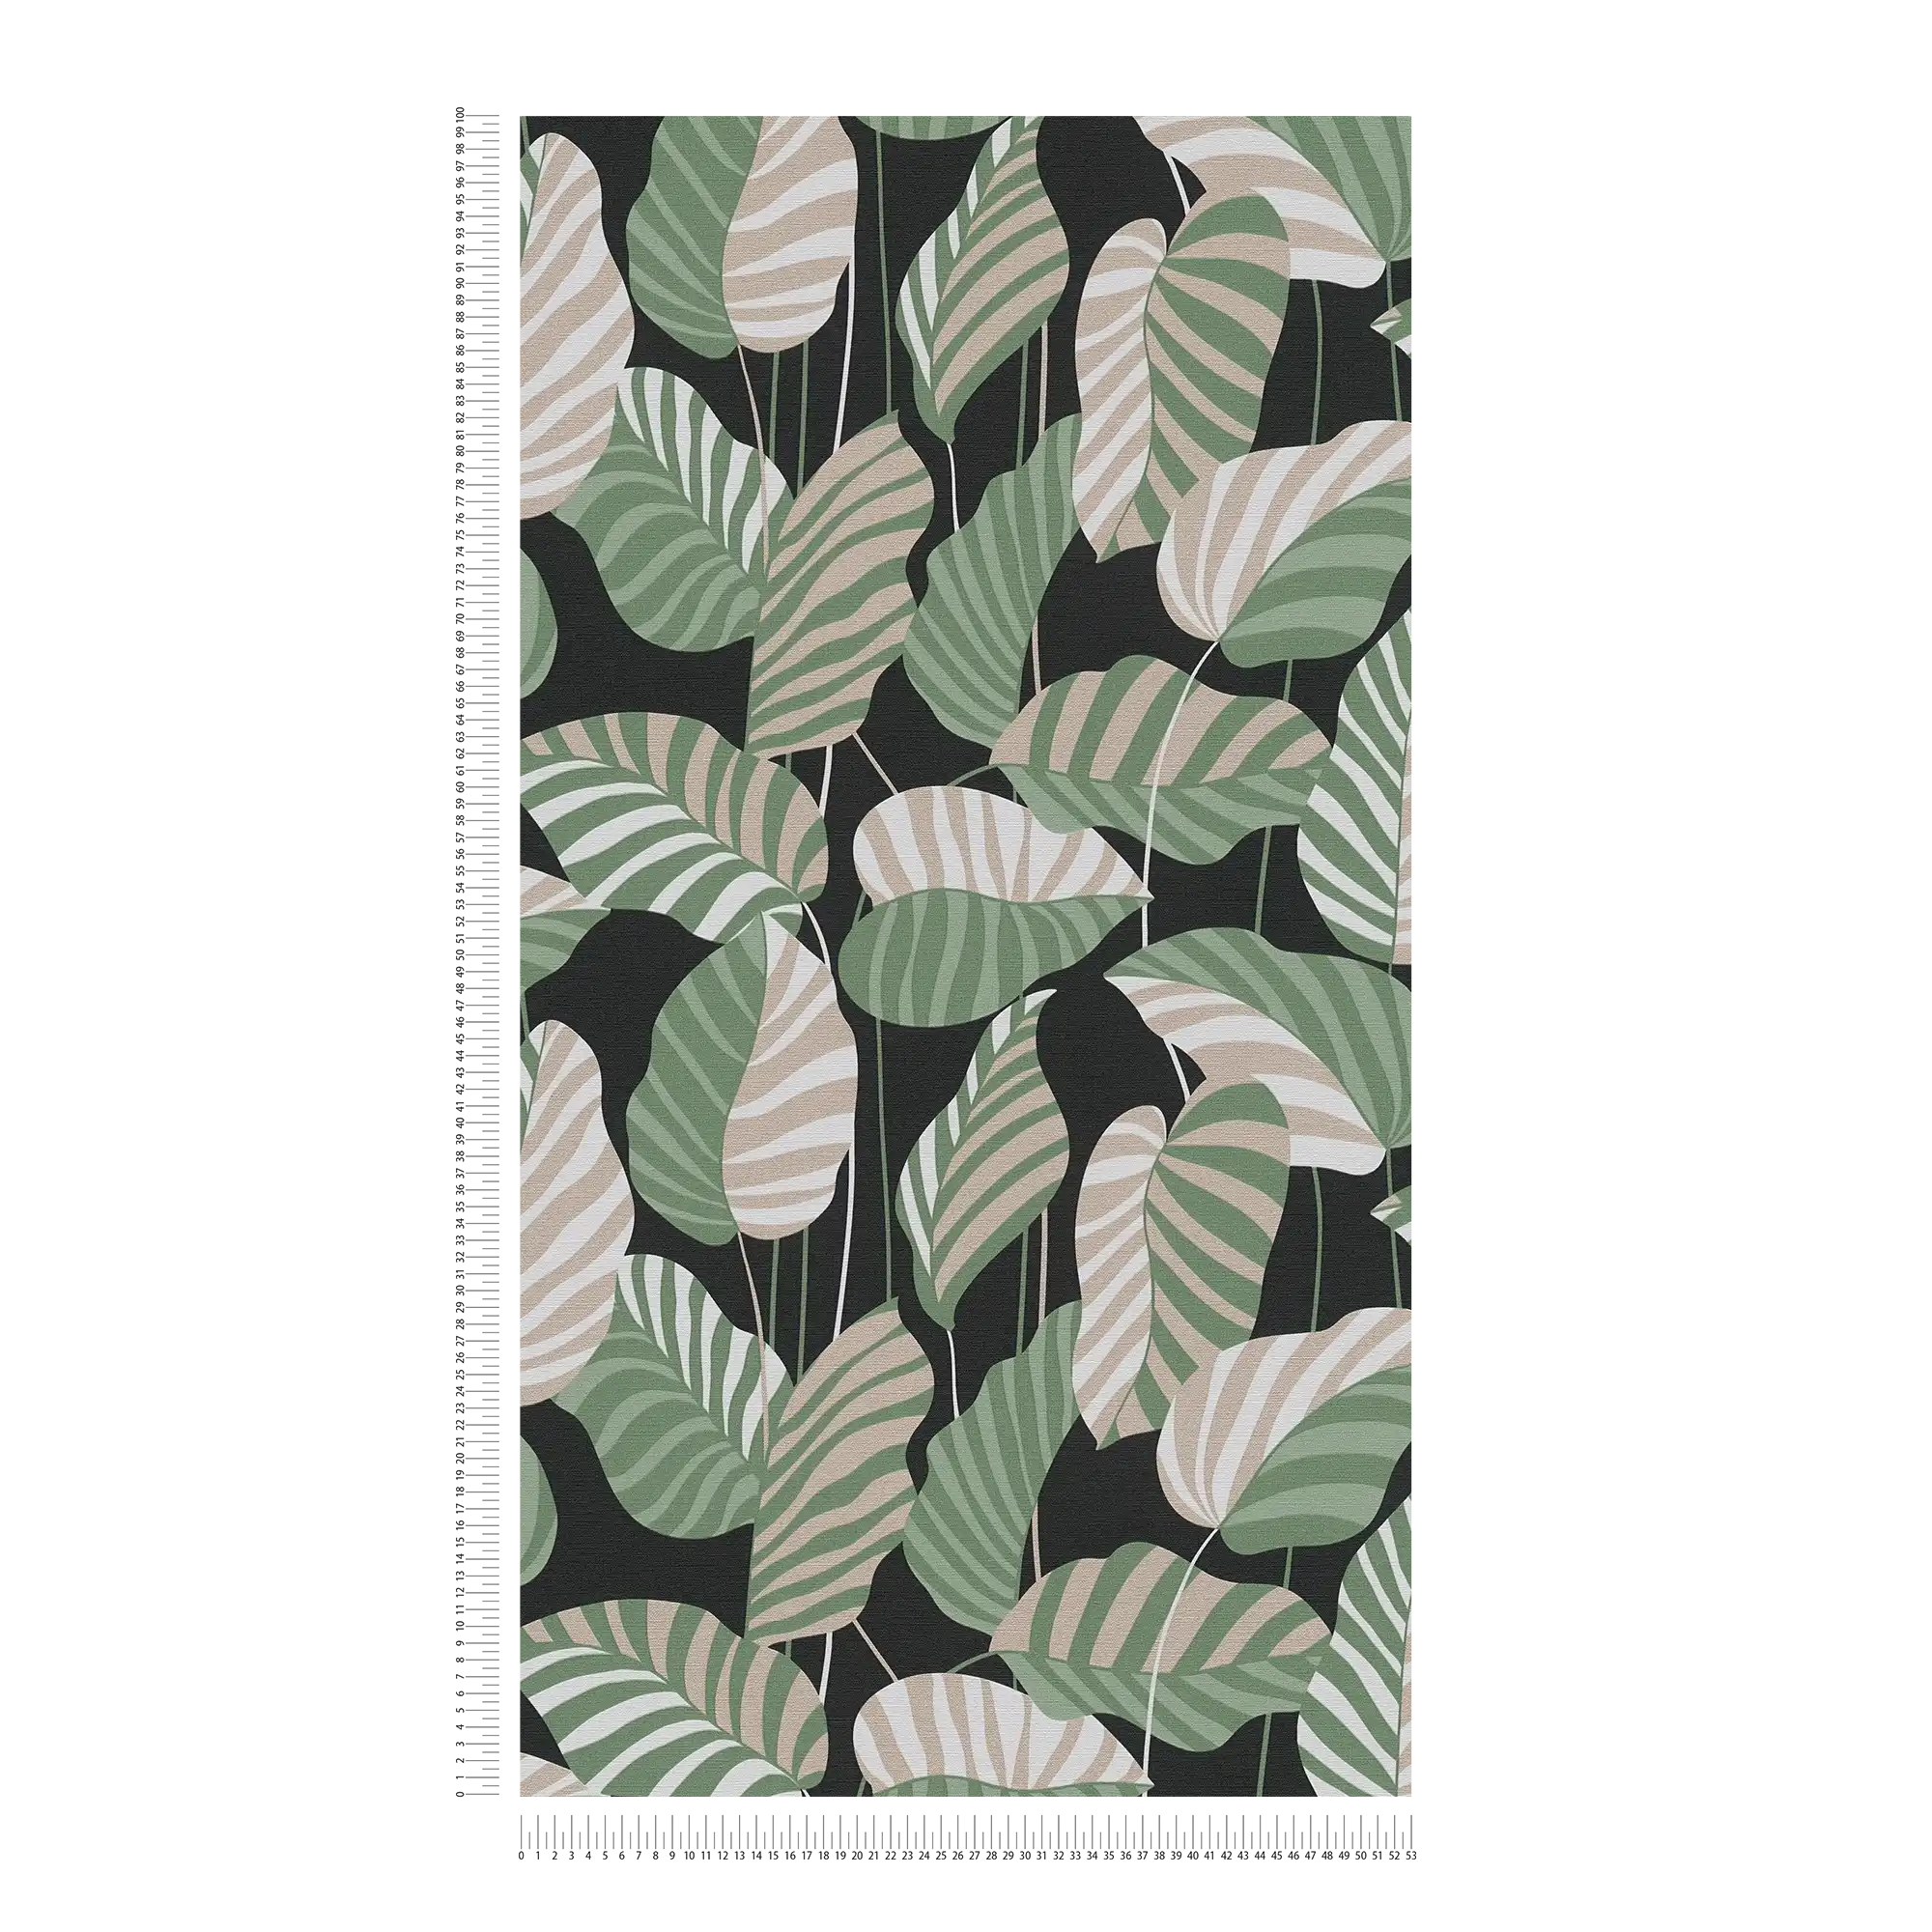             Non-woven wallpaper with palm leaves in a light sheen - black, green, gold
        